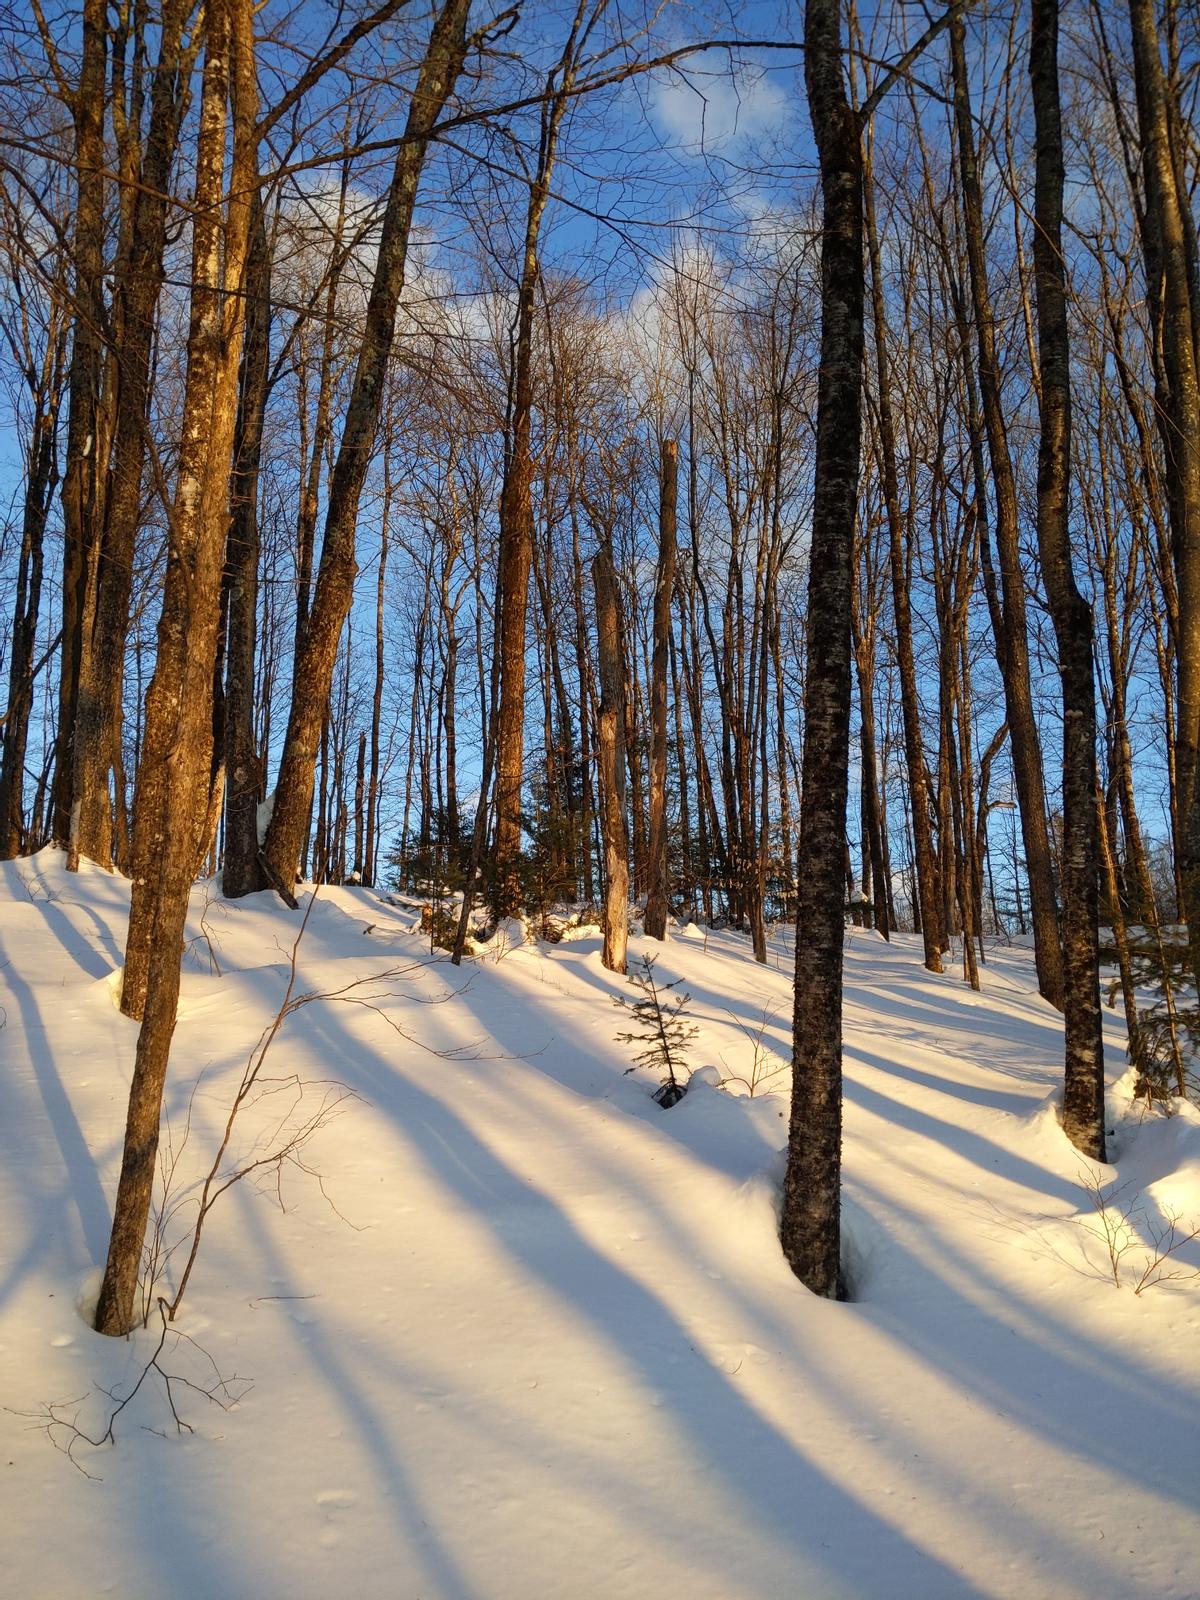 Sunlight on the snowy ground is one of the joys of the winter woods.